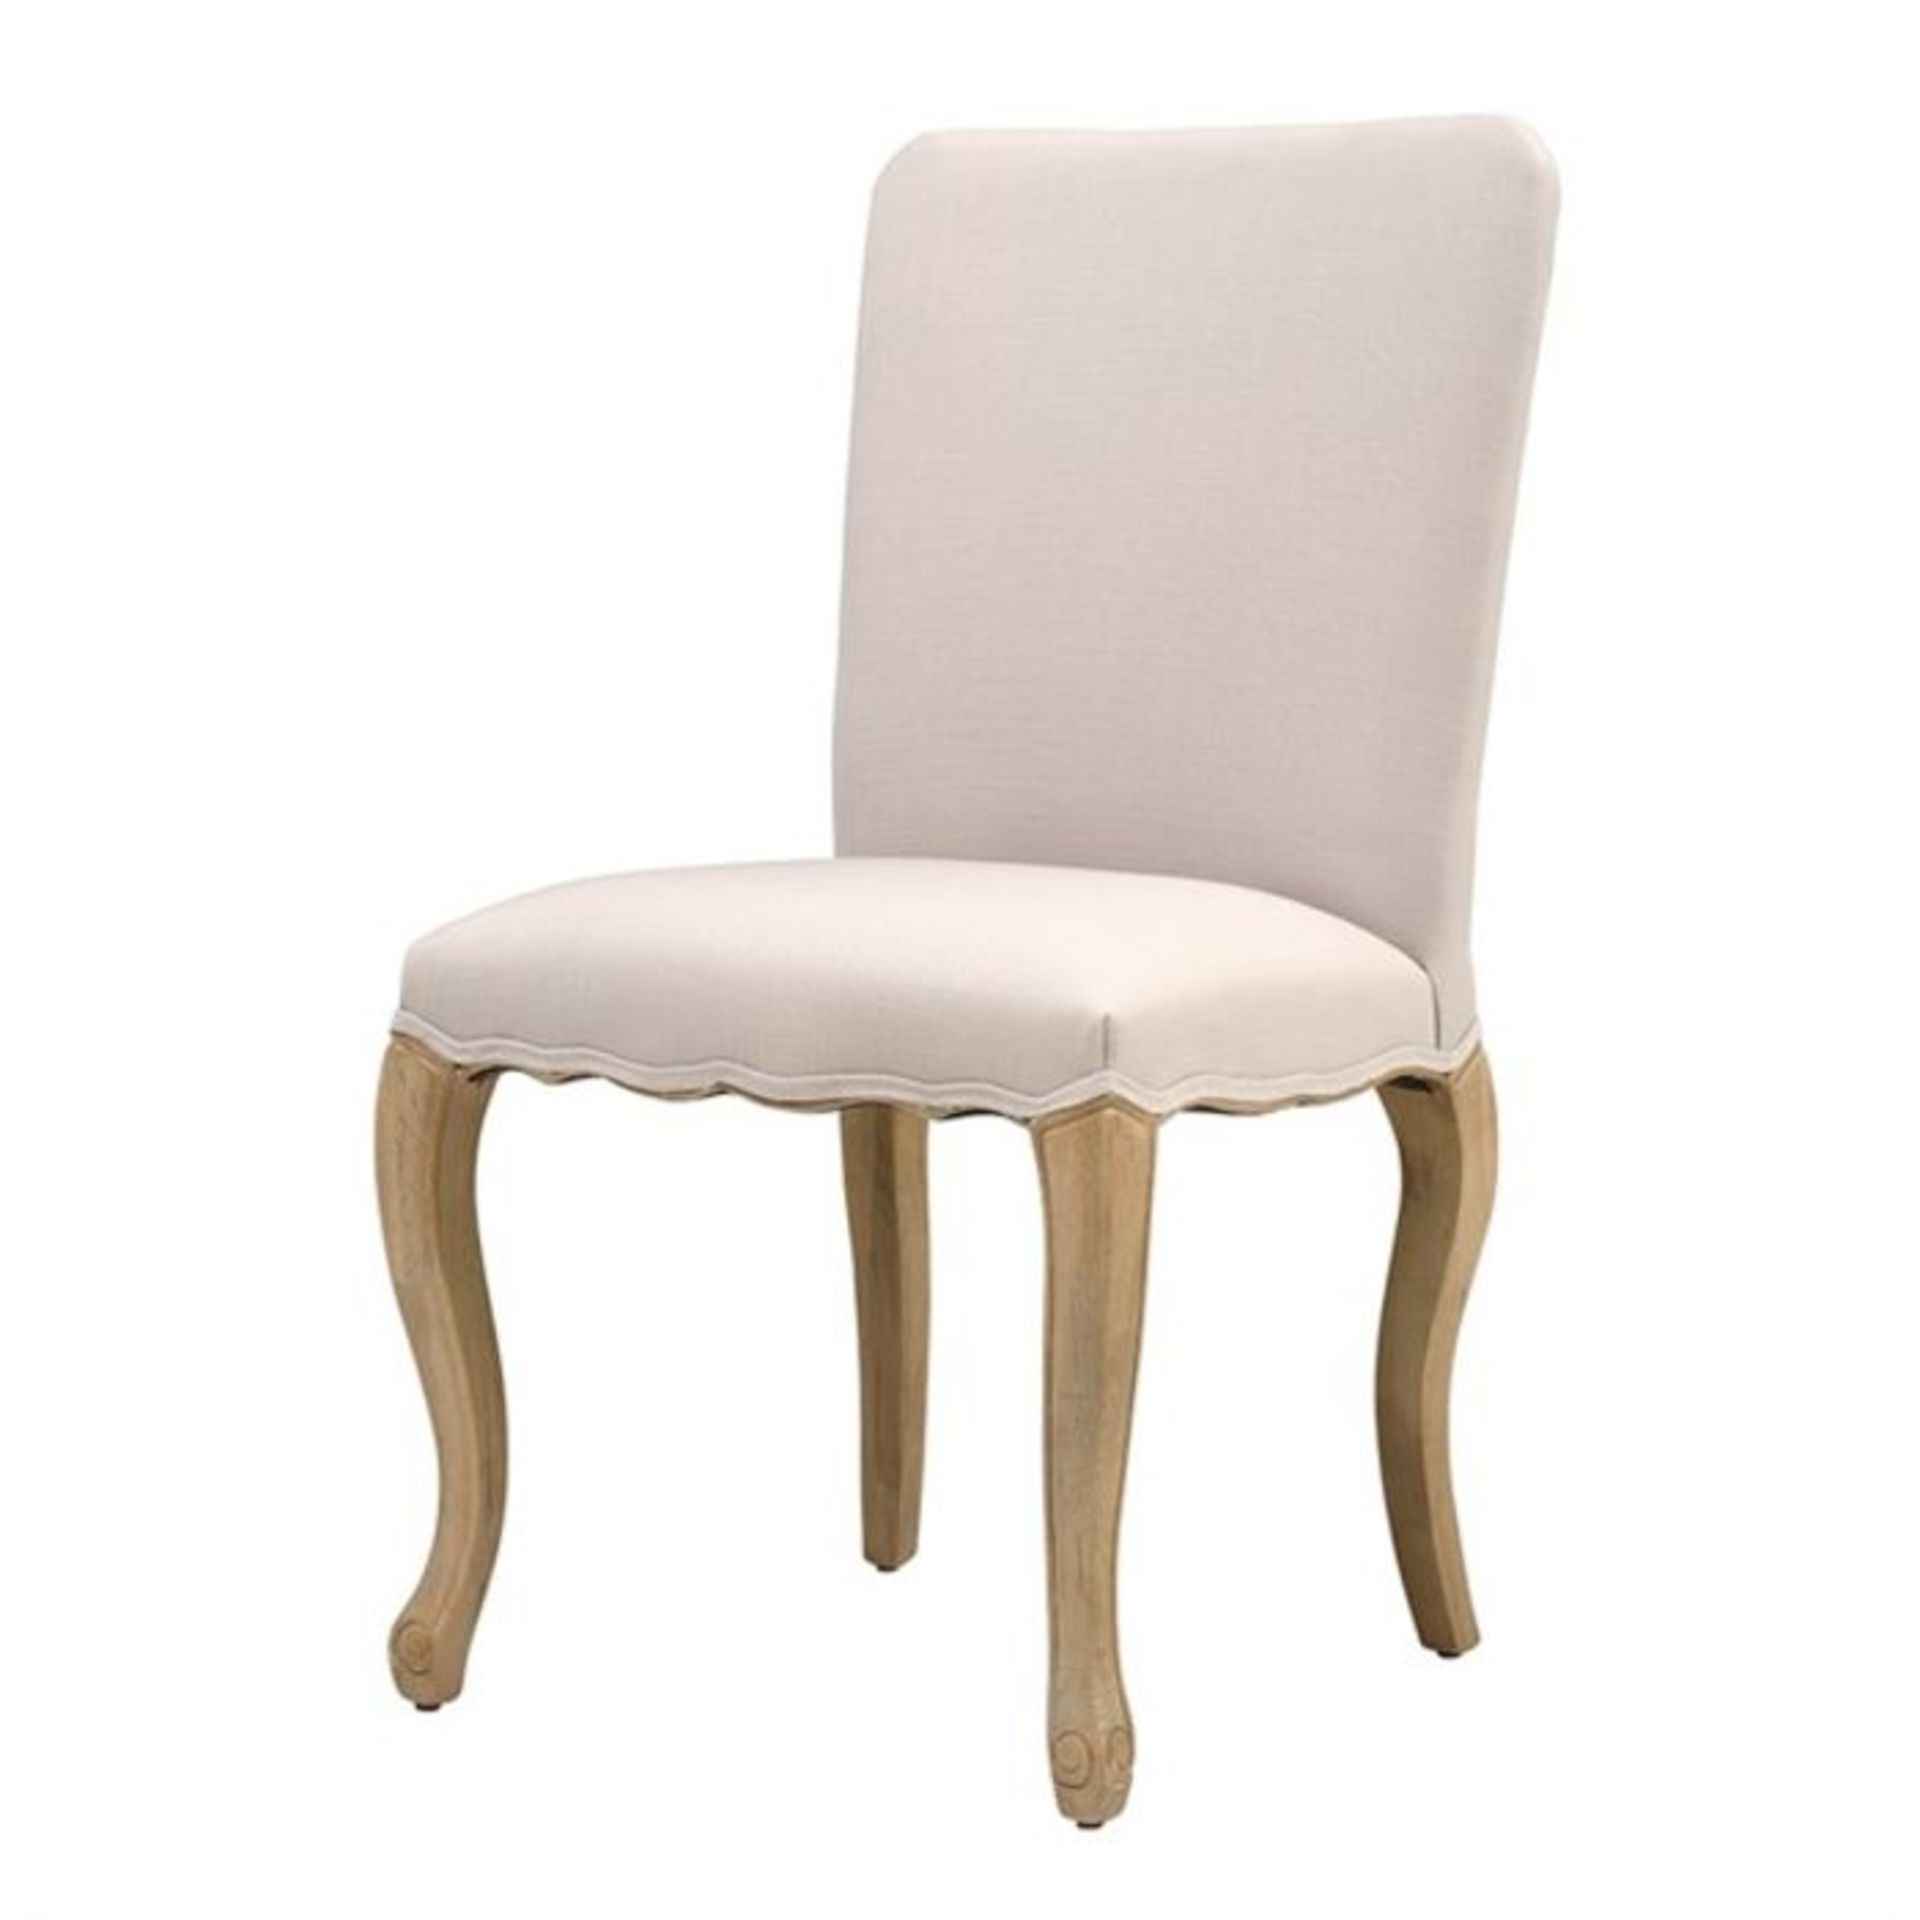 Cotswold Company Camille Limewash Oak Stone Linen Dining Chair RRP ?275.00 Complementing the Camille - Image 3 of 9